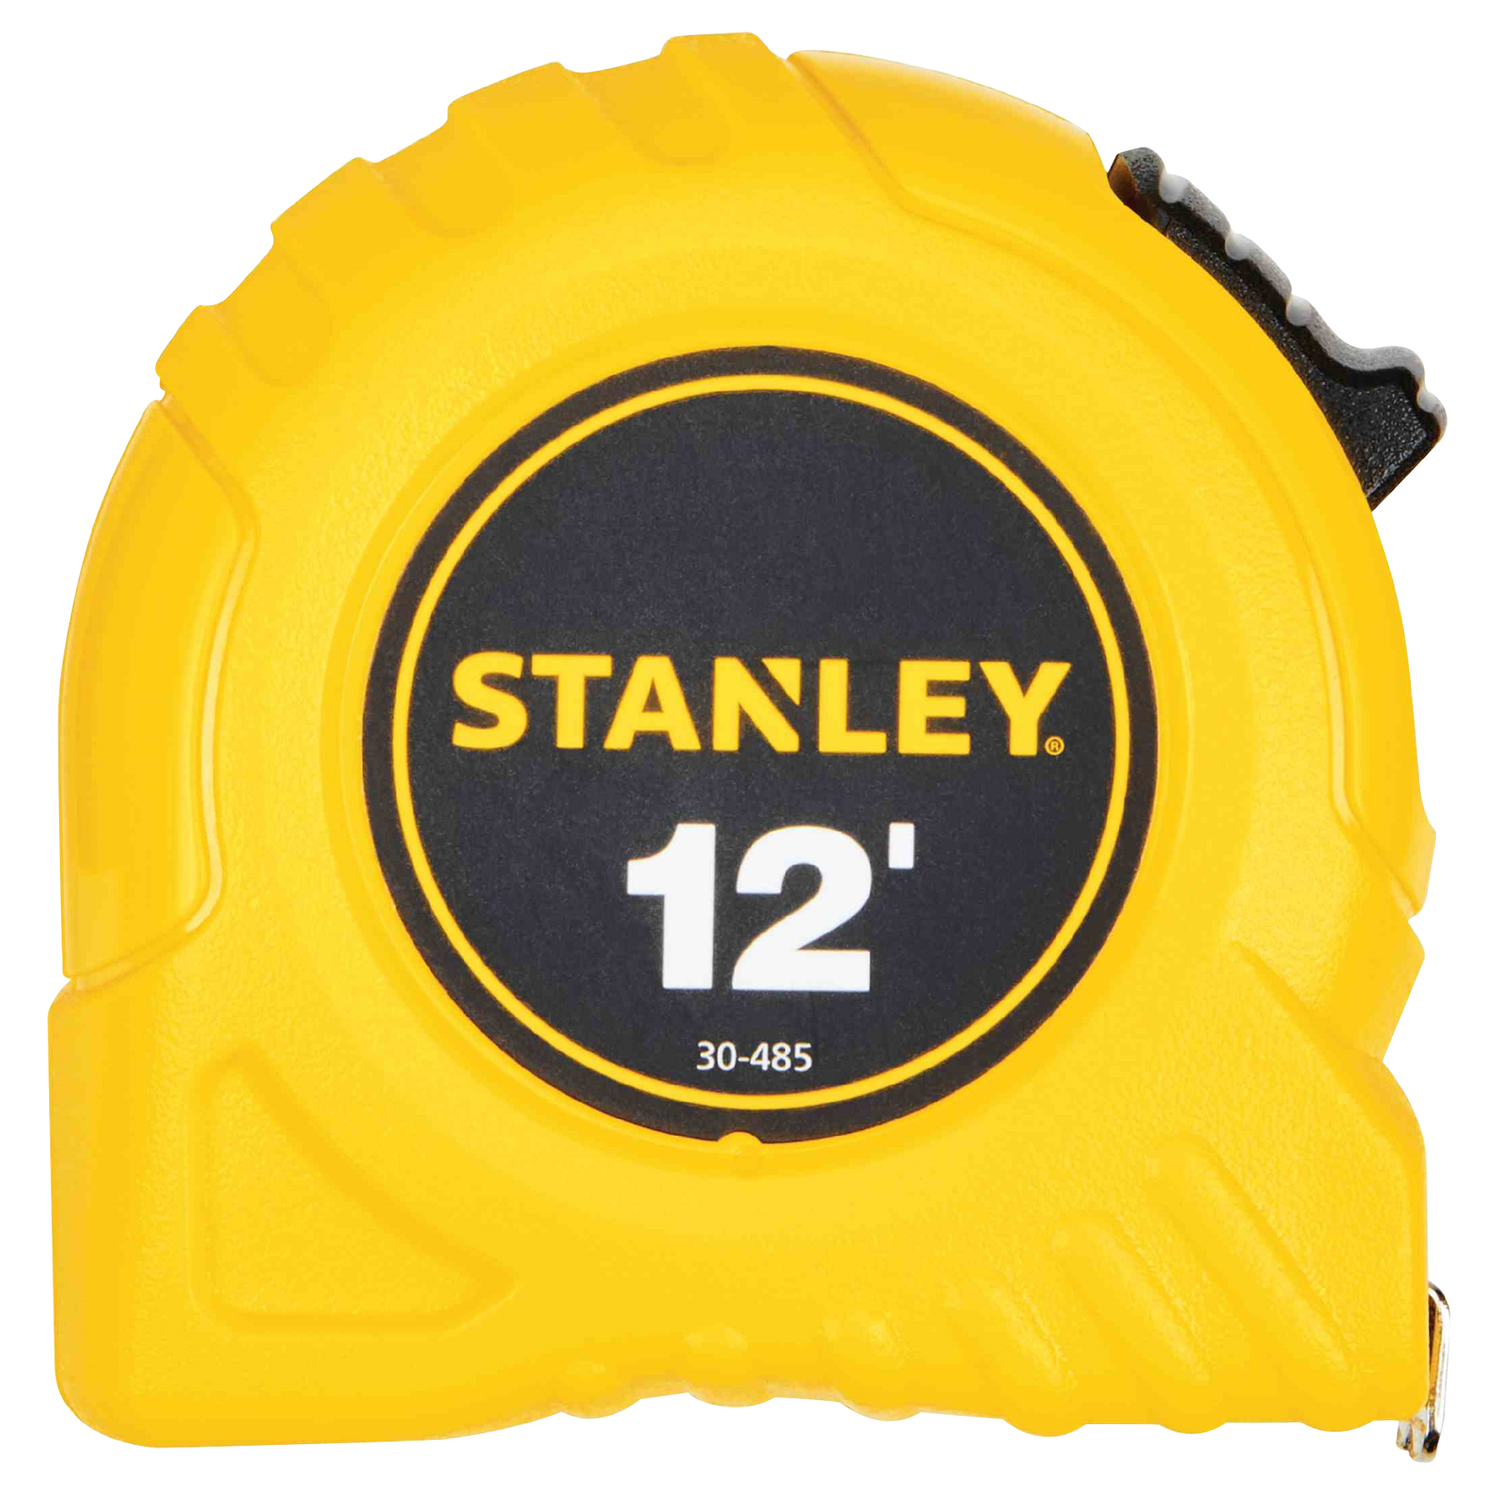 Photos - Tape Measure and Surveyor Tape Stanley 12 ft. L X 0.5 in. W Tape Measure 1 pk 30-485 